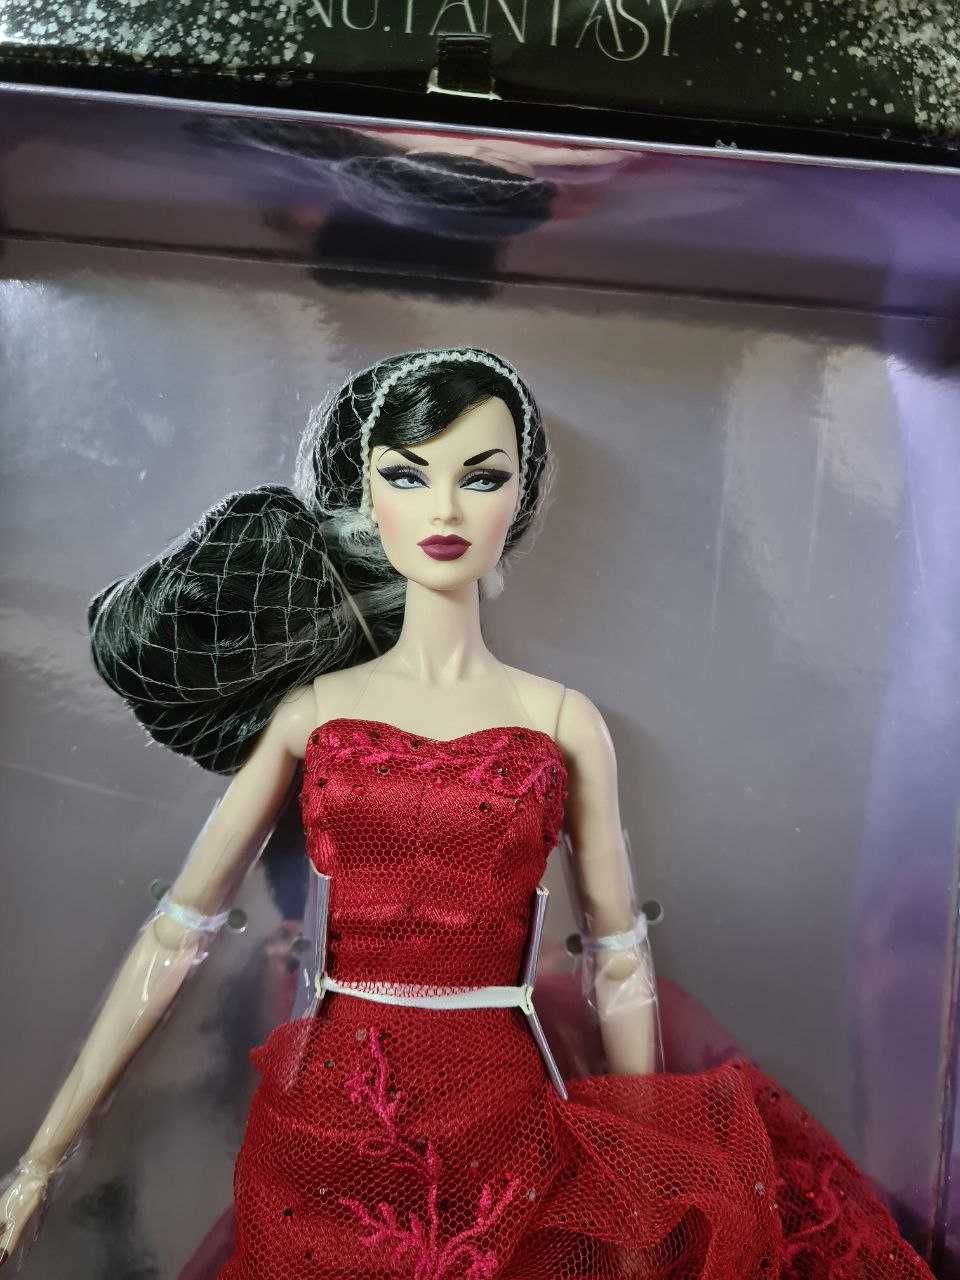 lalka Integrity toys "Scarlett Hex NU. Fantasy:The Coven Couture"